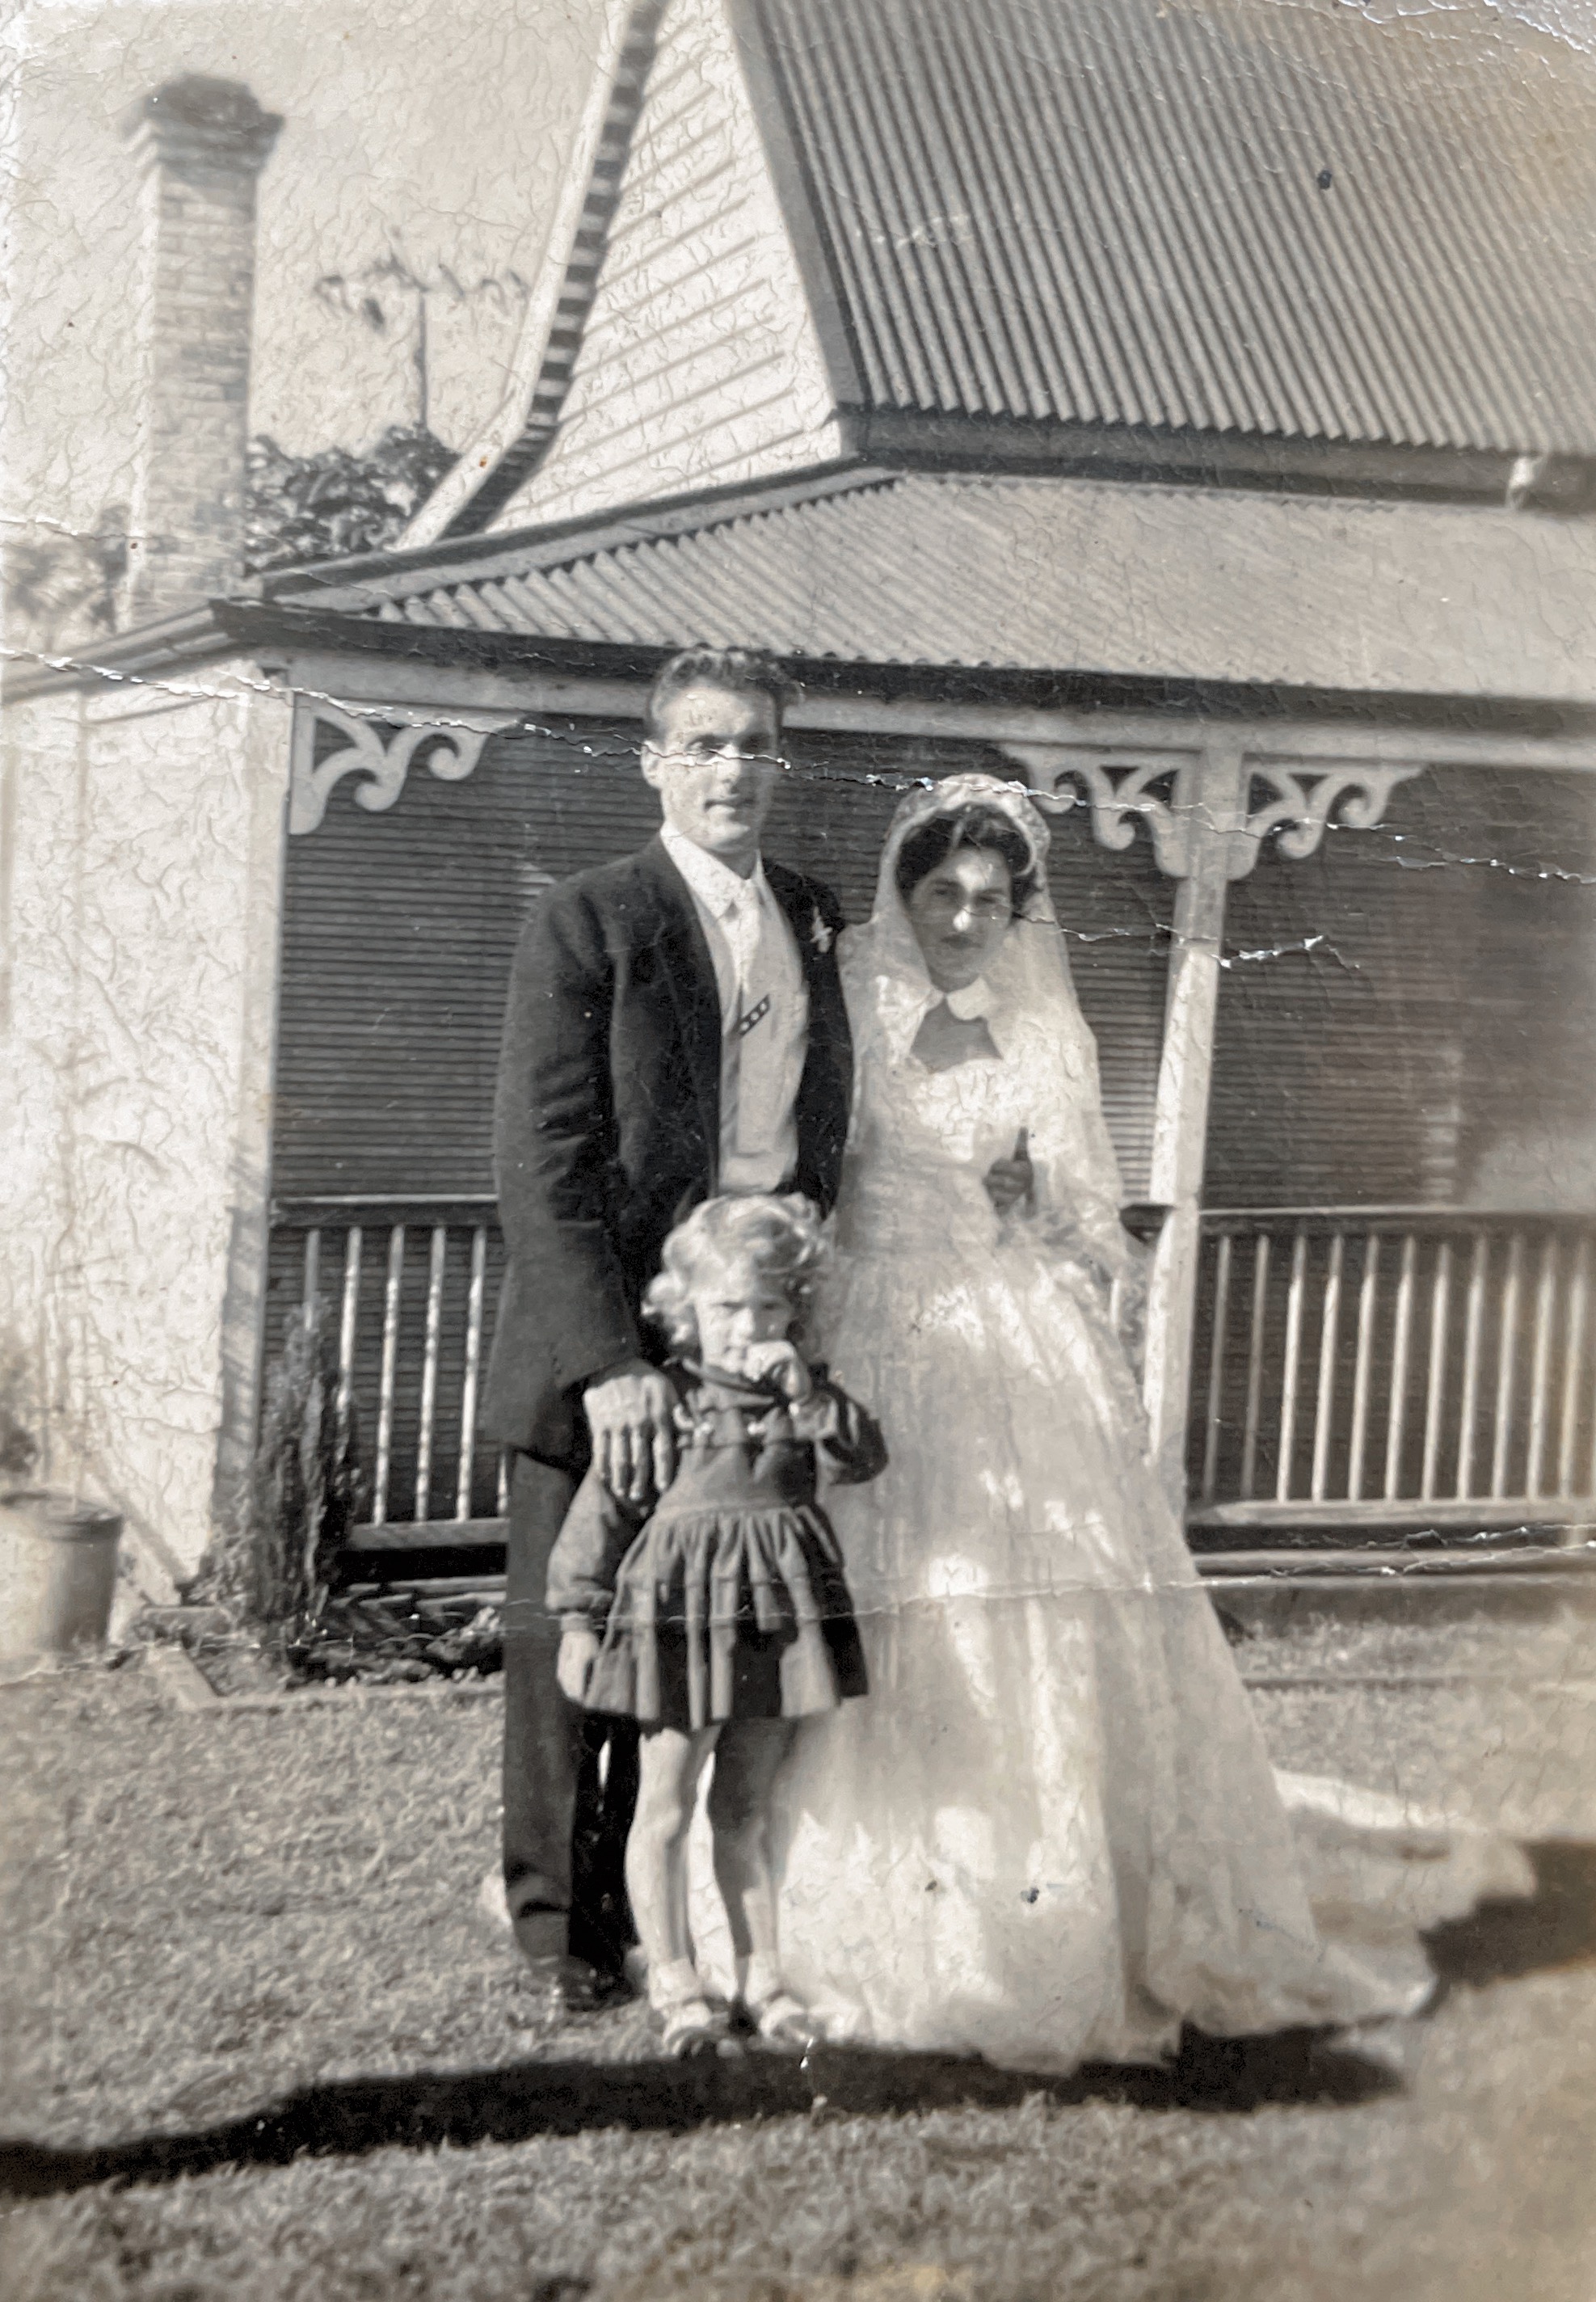 Mum and Dad outside Nana’s house after their wedding, May 1958. Dianne, Lucy’s daughter, is the little girl in front.